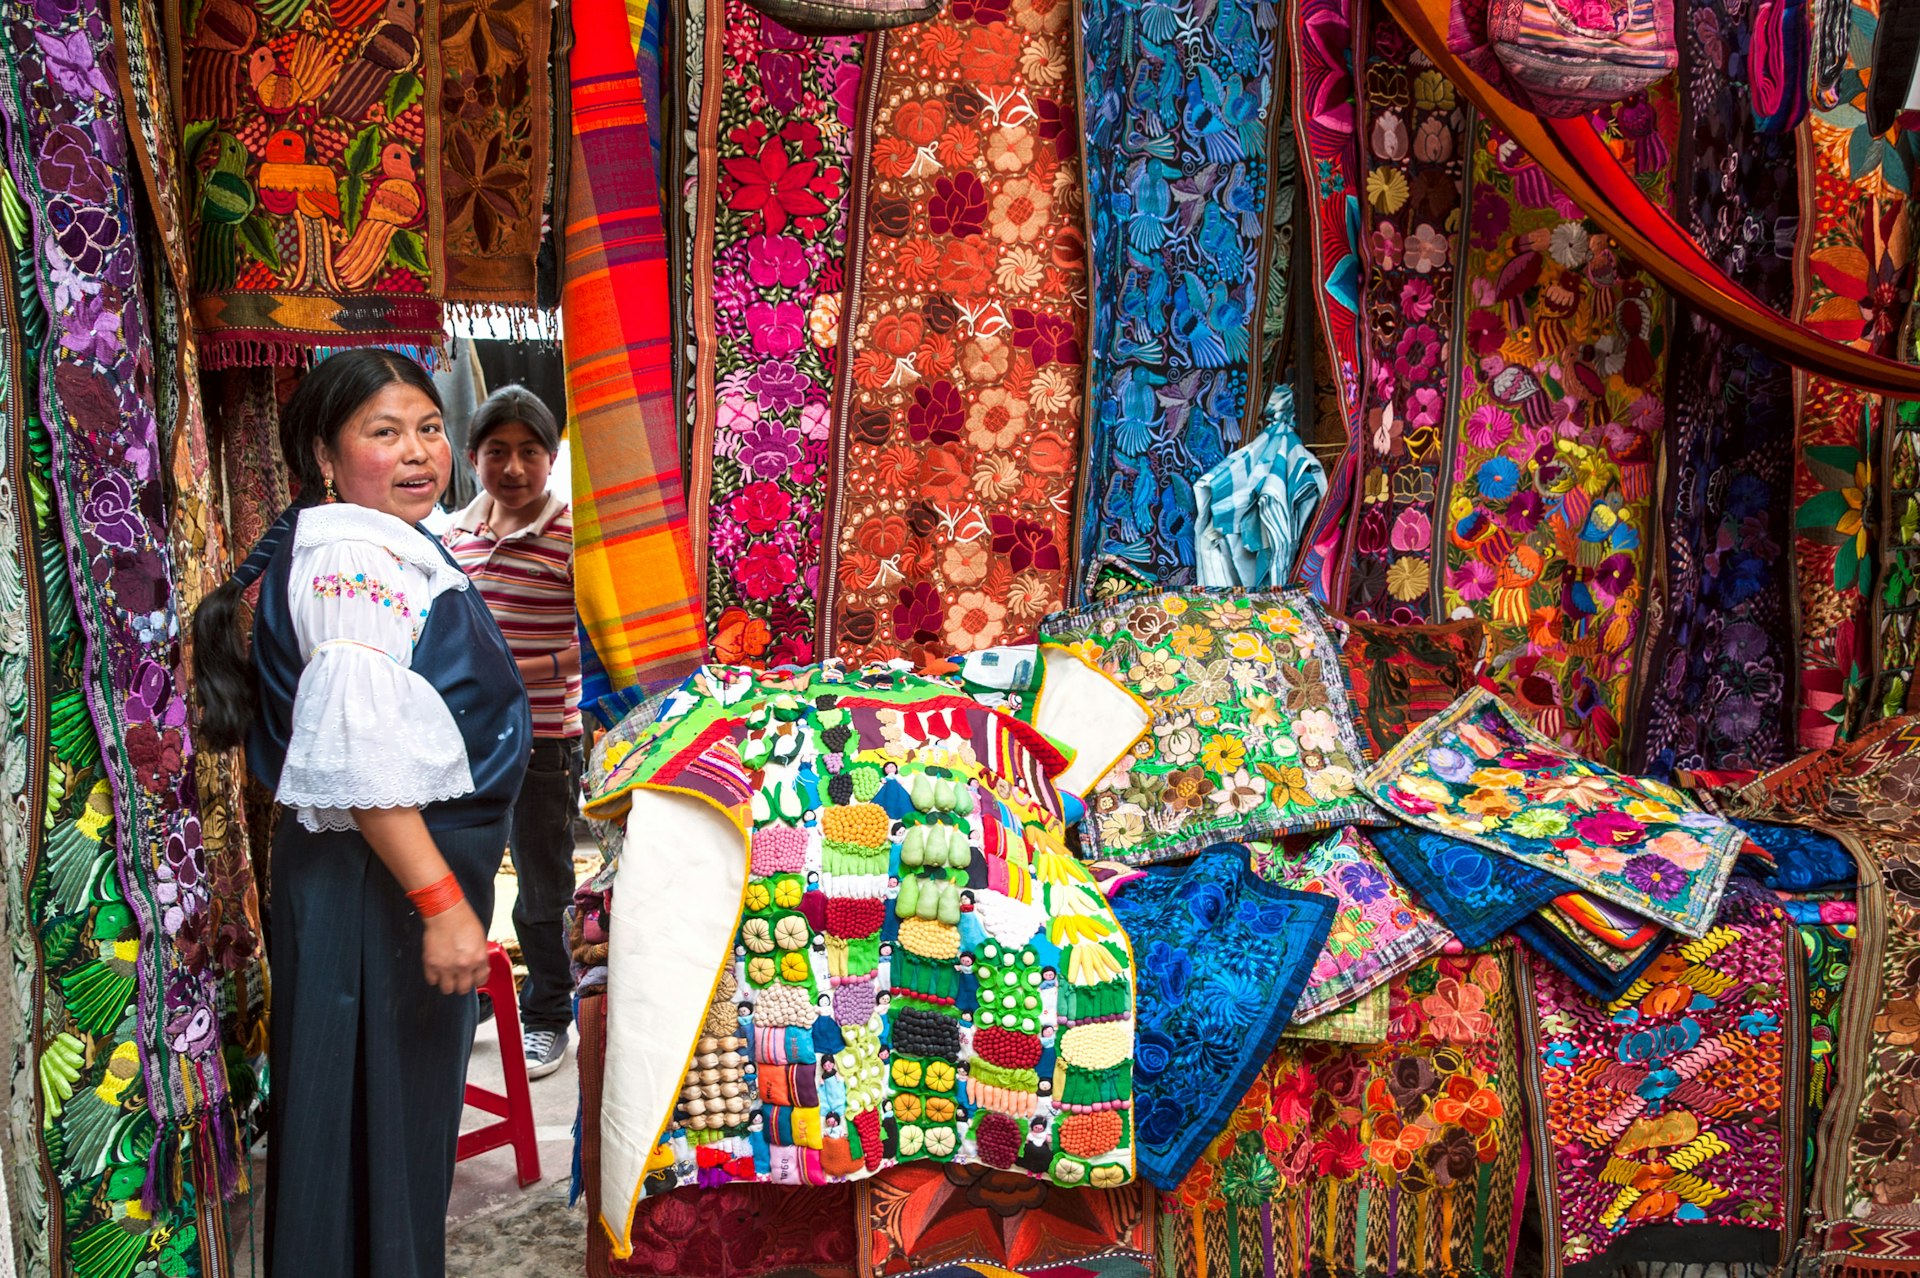 A woman sells colorful women products in the market of Otavalo, Ecuador